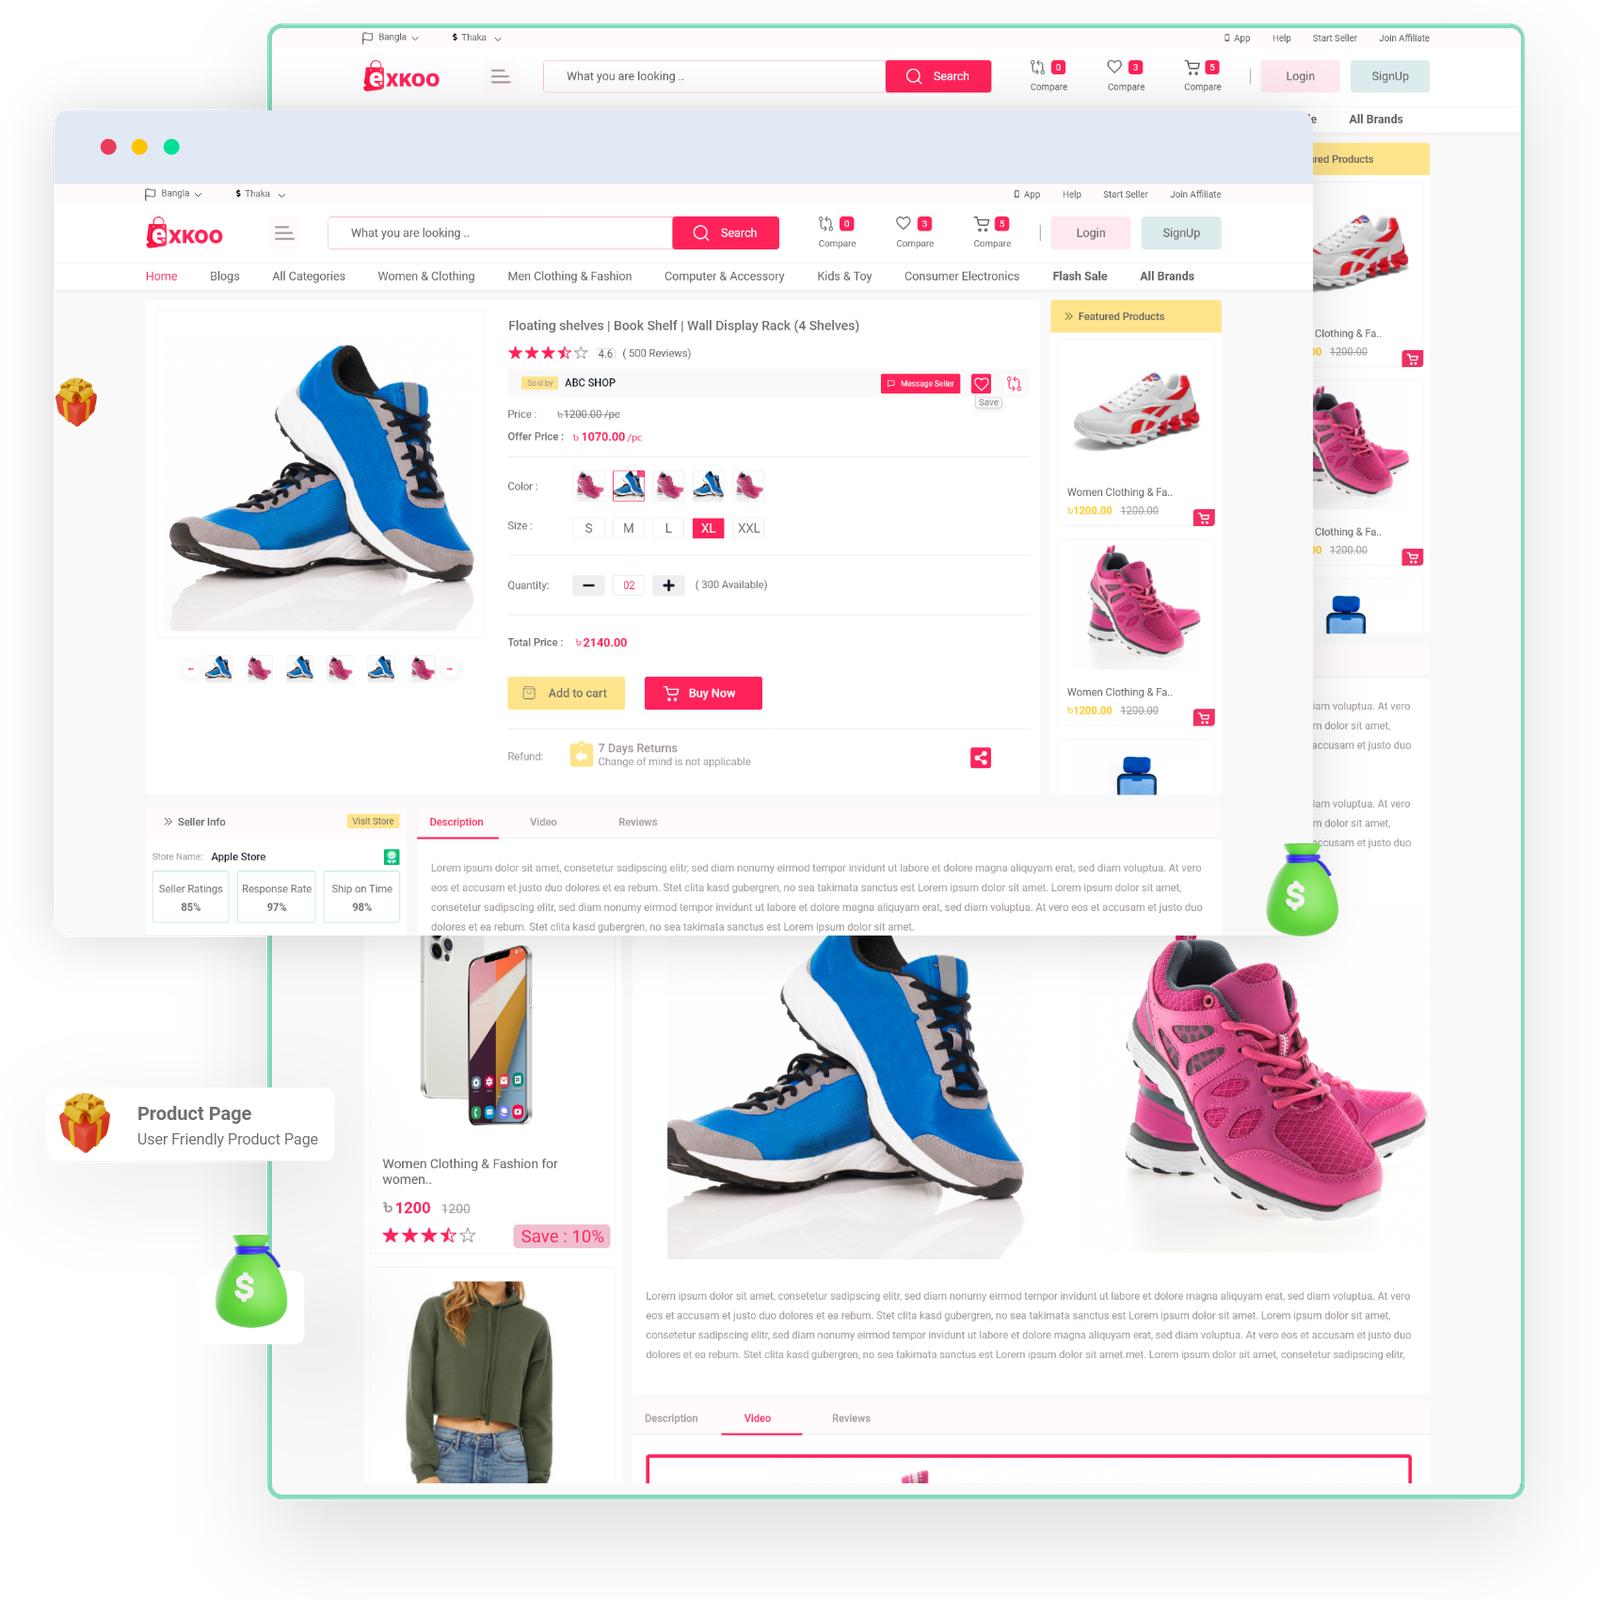 Products Pages